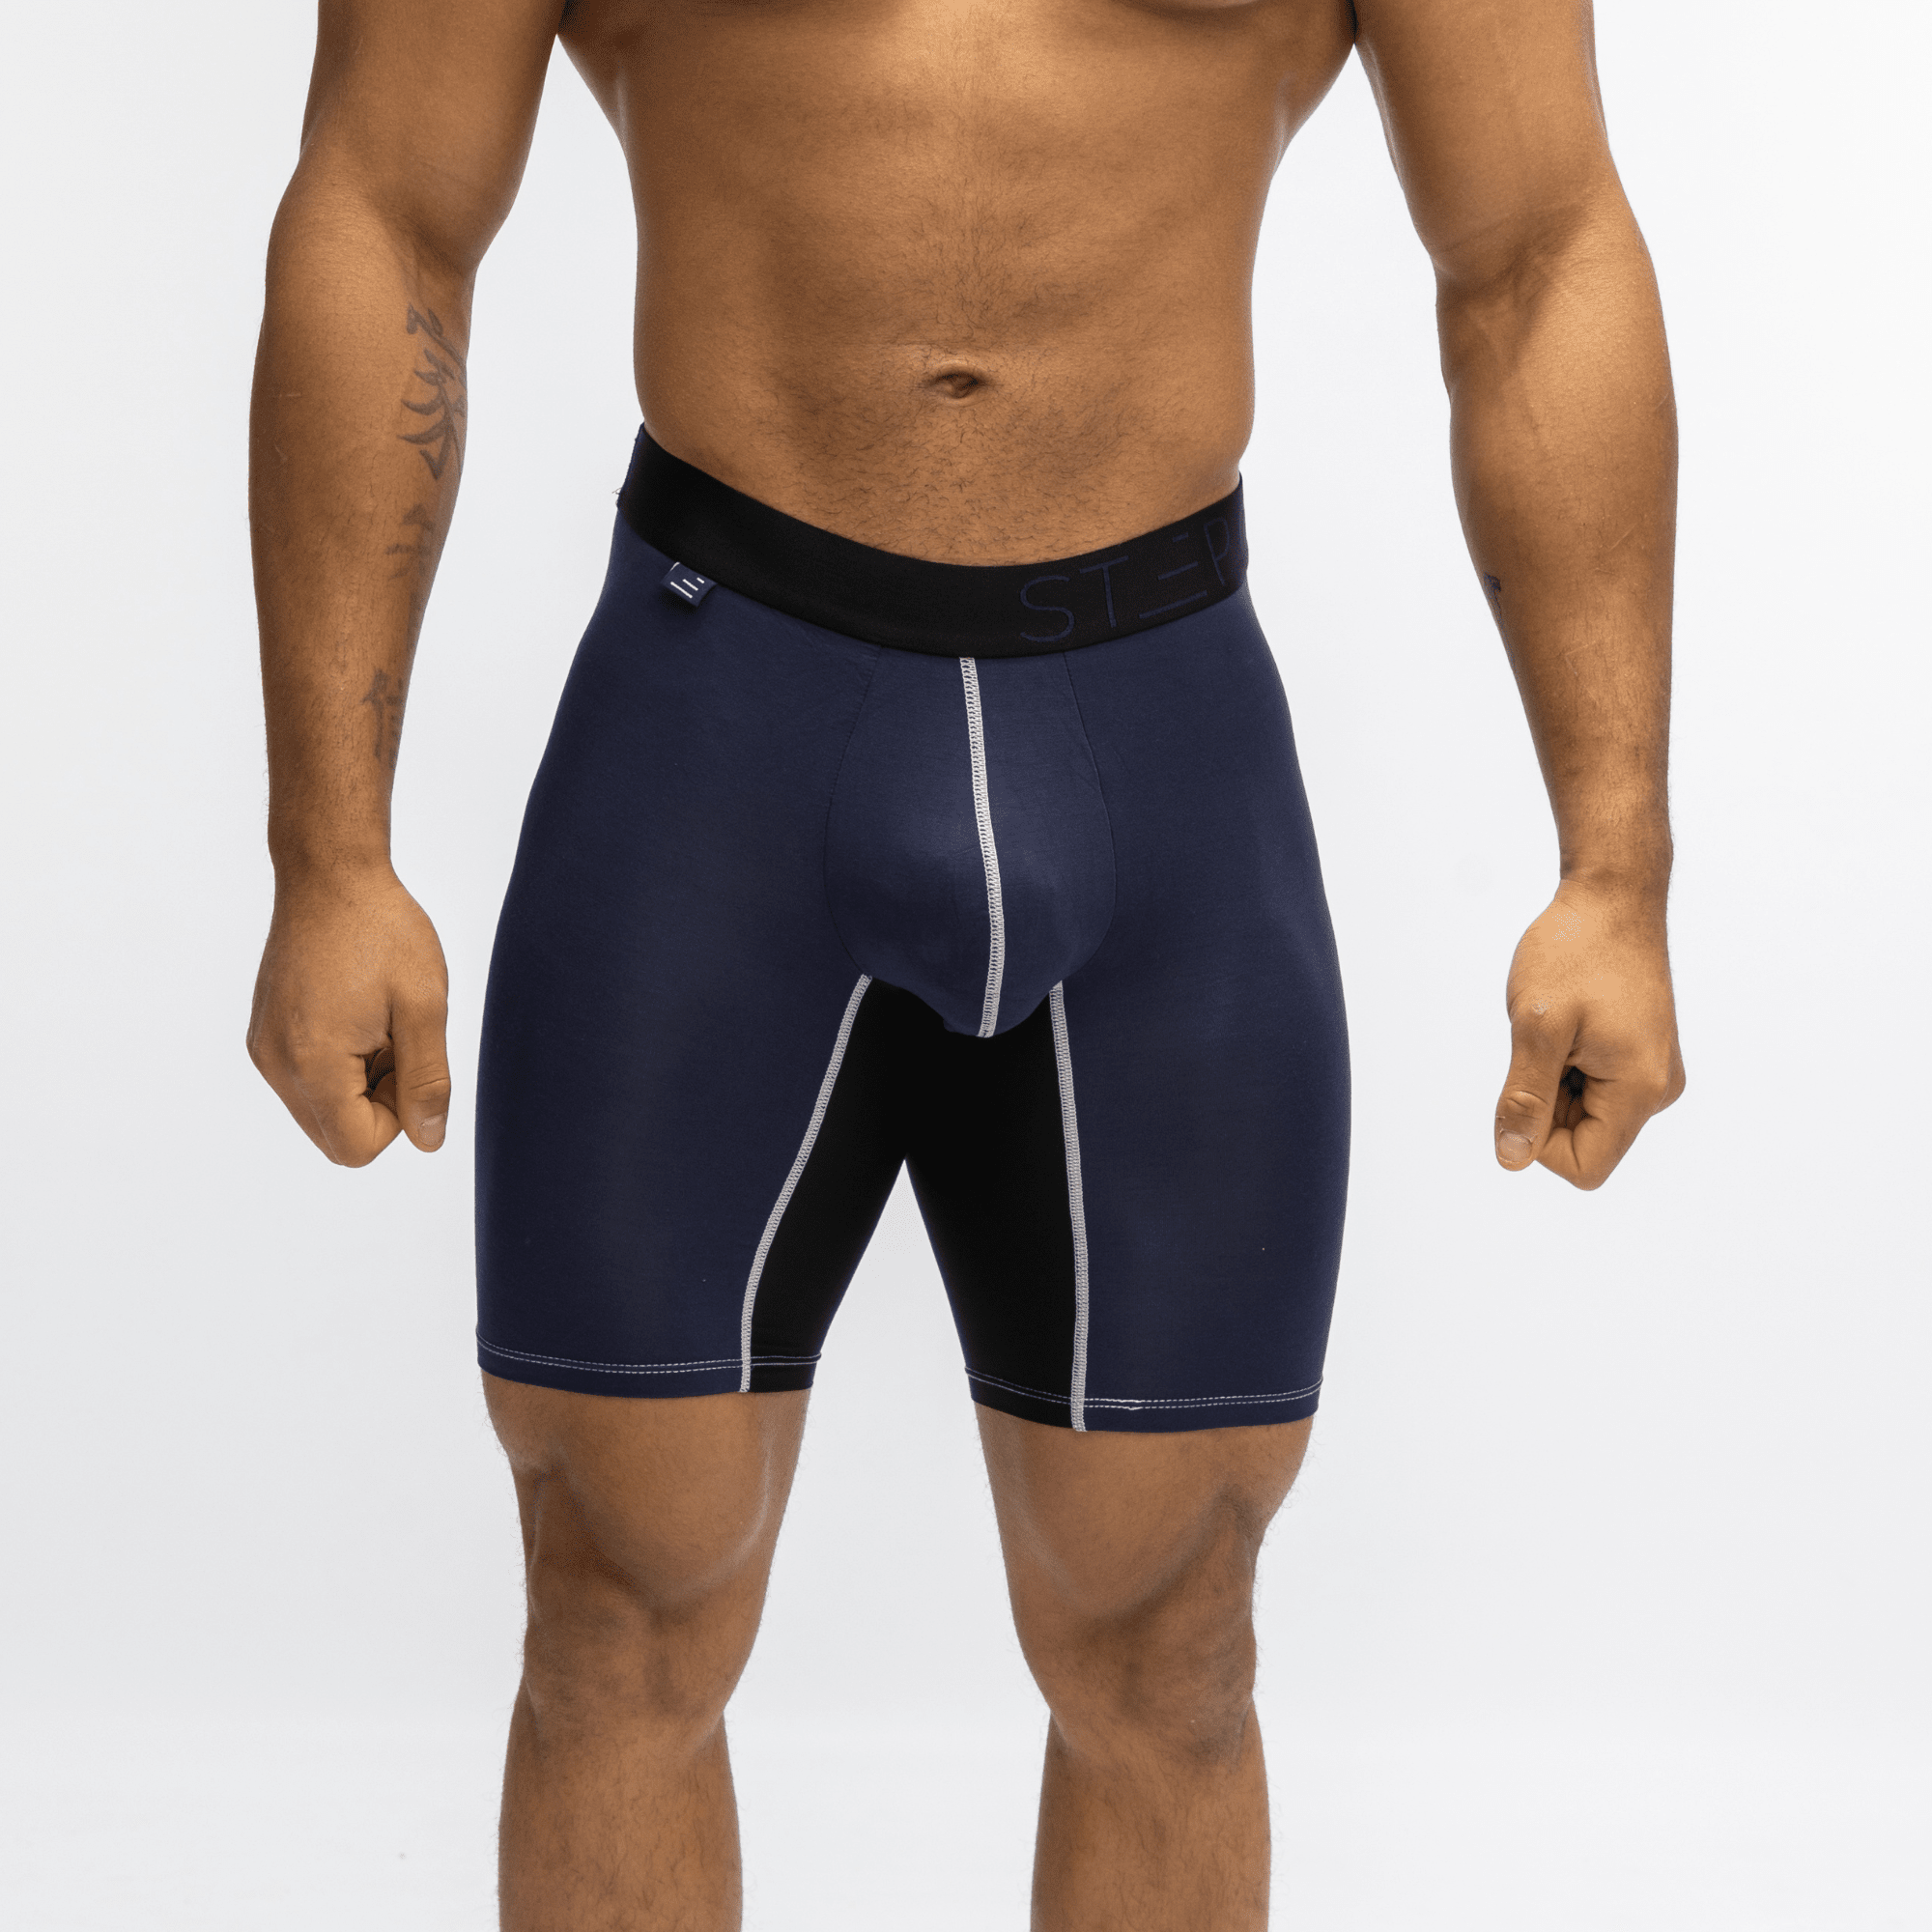 OPTIMUM GALLERY Fitness Fighter Frenchie Gym Supporter Underwear Hip  Support Supporter - Buy OPTIMUM GALLERY Fitness Fighter Frenchie Gym  Supporter Underwear Hip Support Supporter Online at Best Prices in India -  Fitness